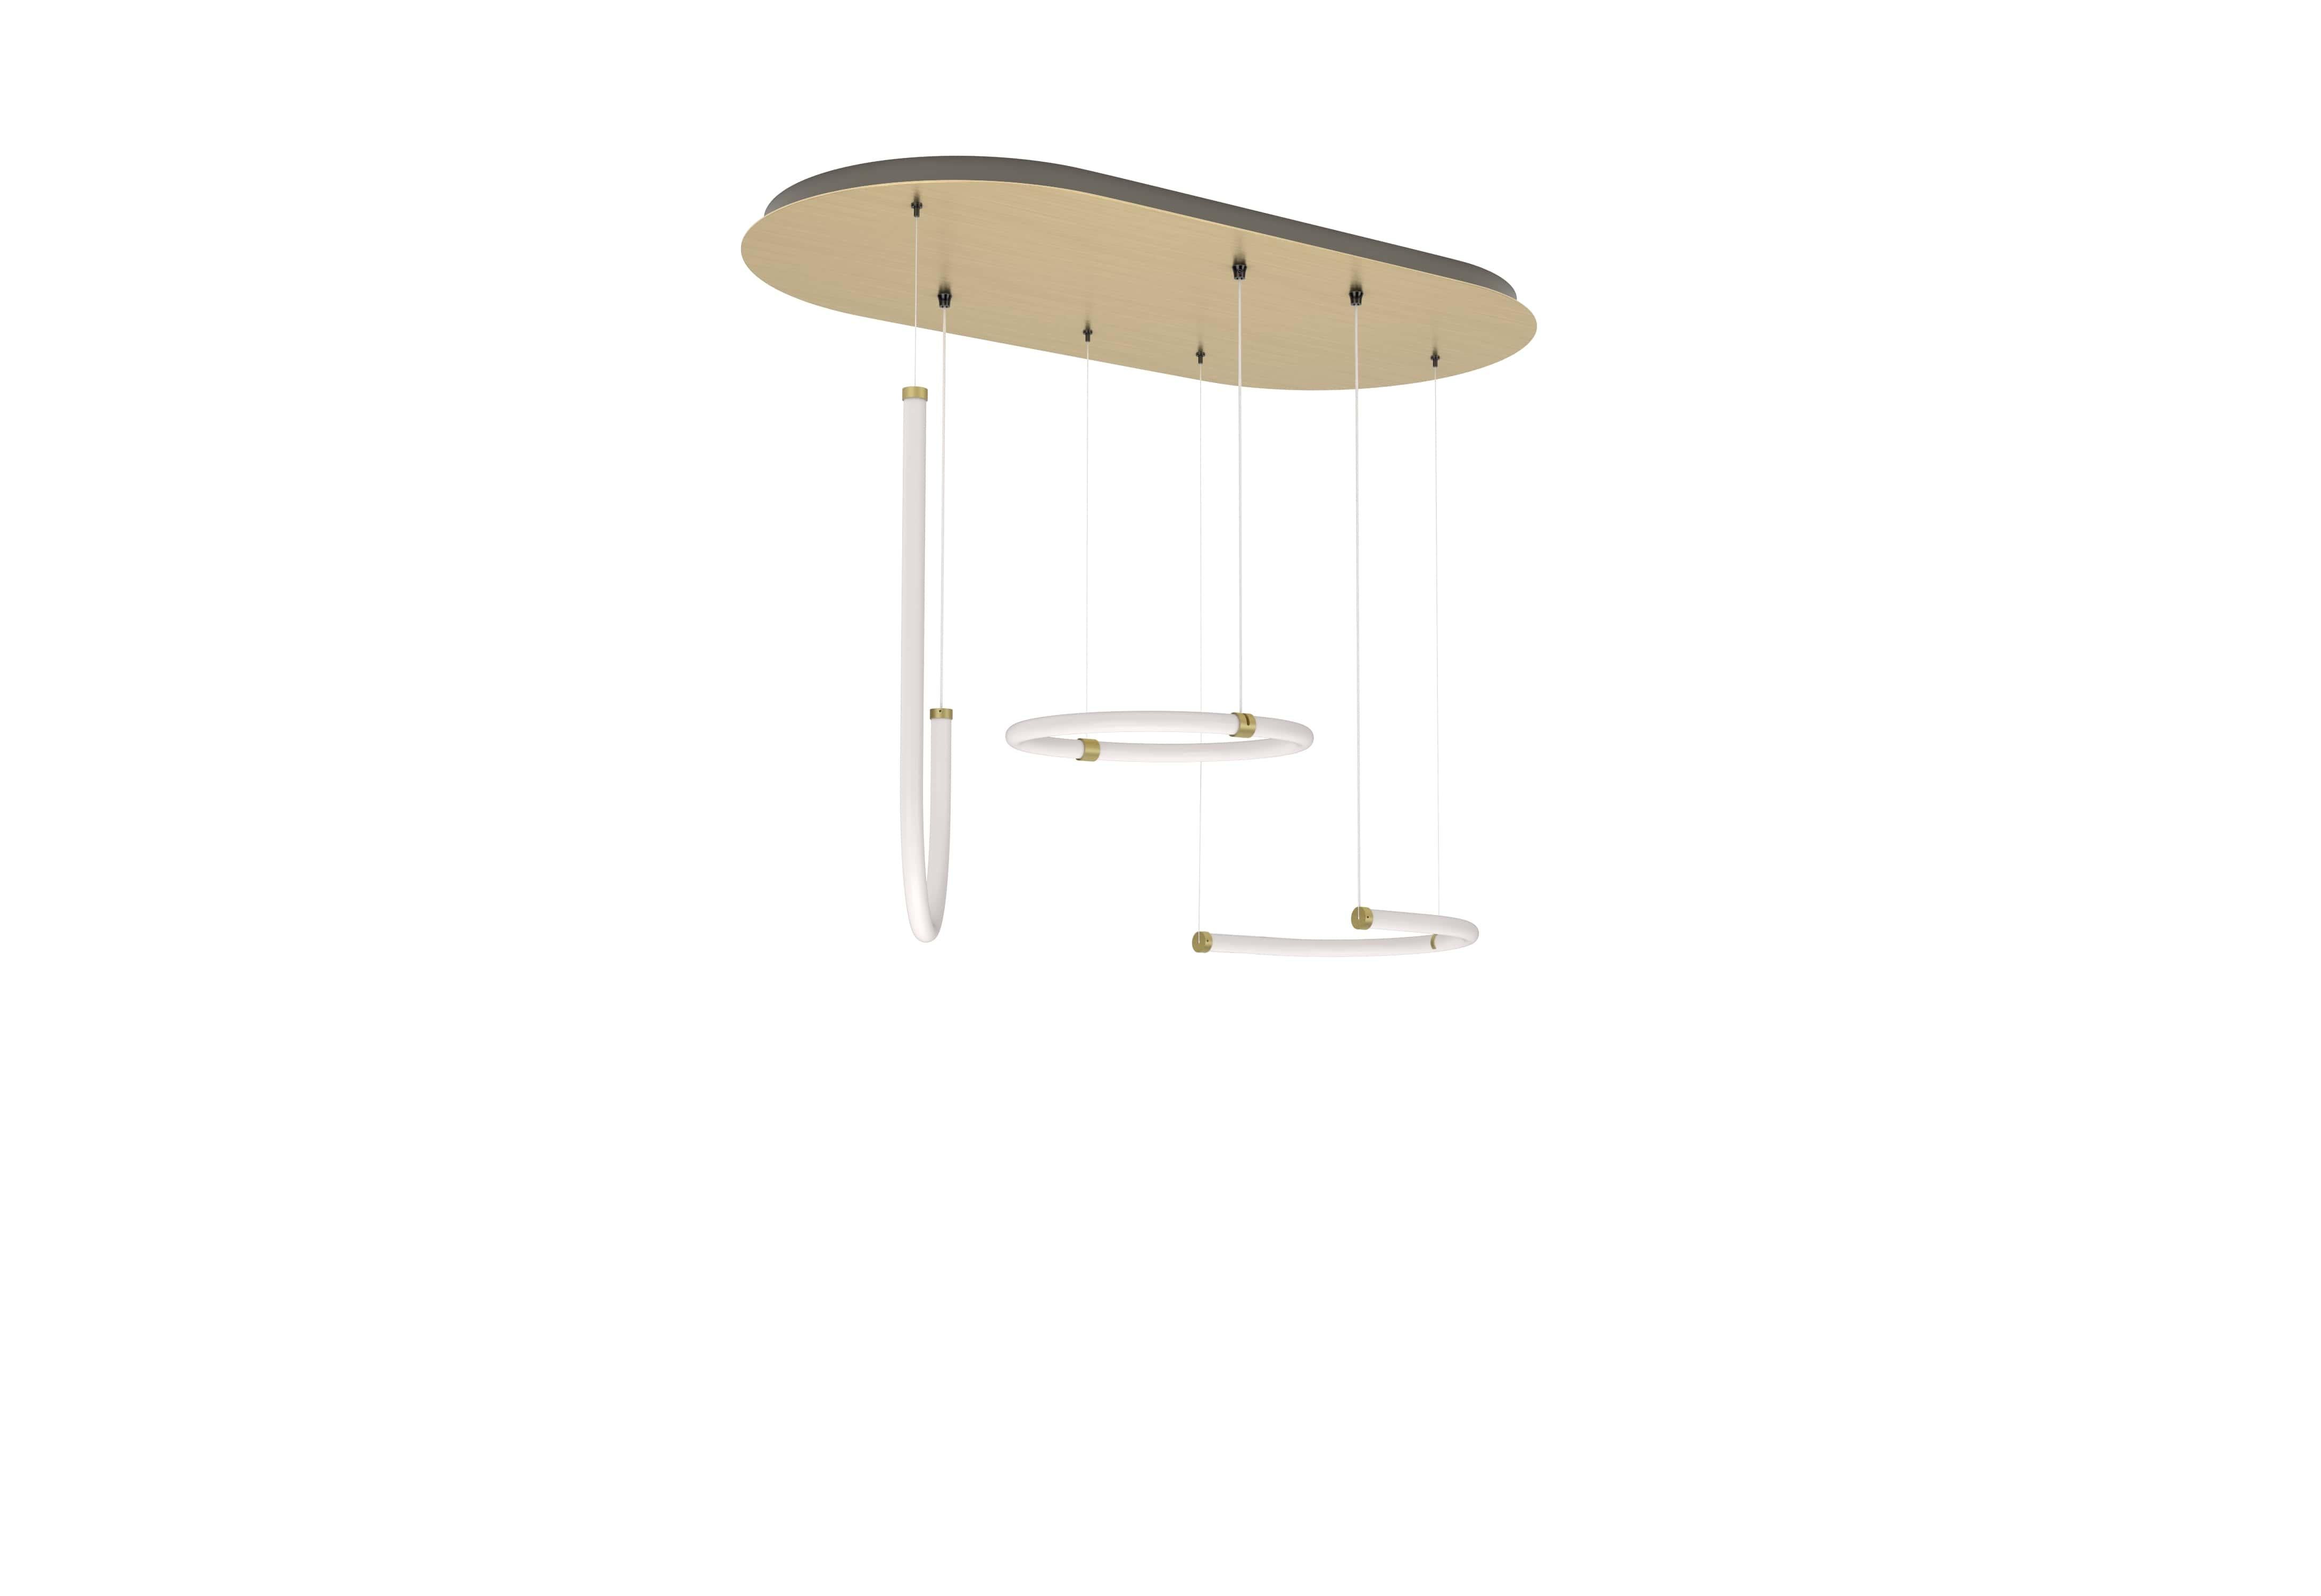 Petite Friture Unseen Triple Pendant Light System in Brass Transluscent with Curved LED-lights by Studio Pepe, 2020

Unseen is a set of modular curved LED-light tubes that seemingly float in space. The collection is a sleek lighting ensemble,